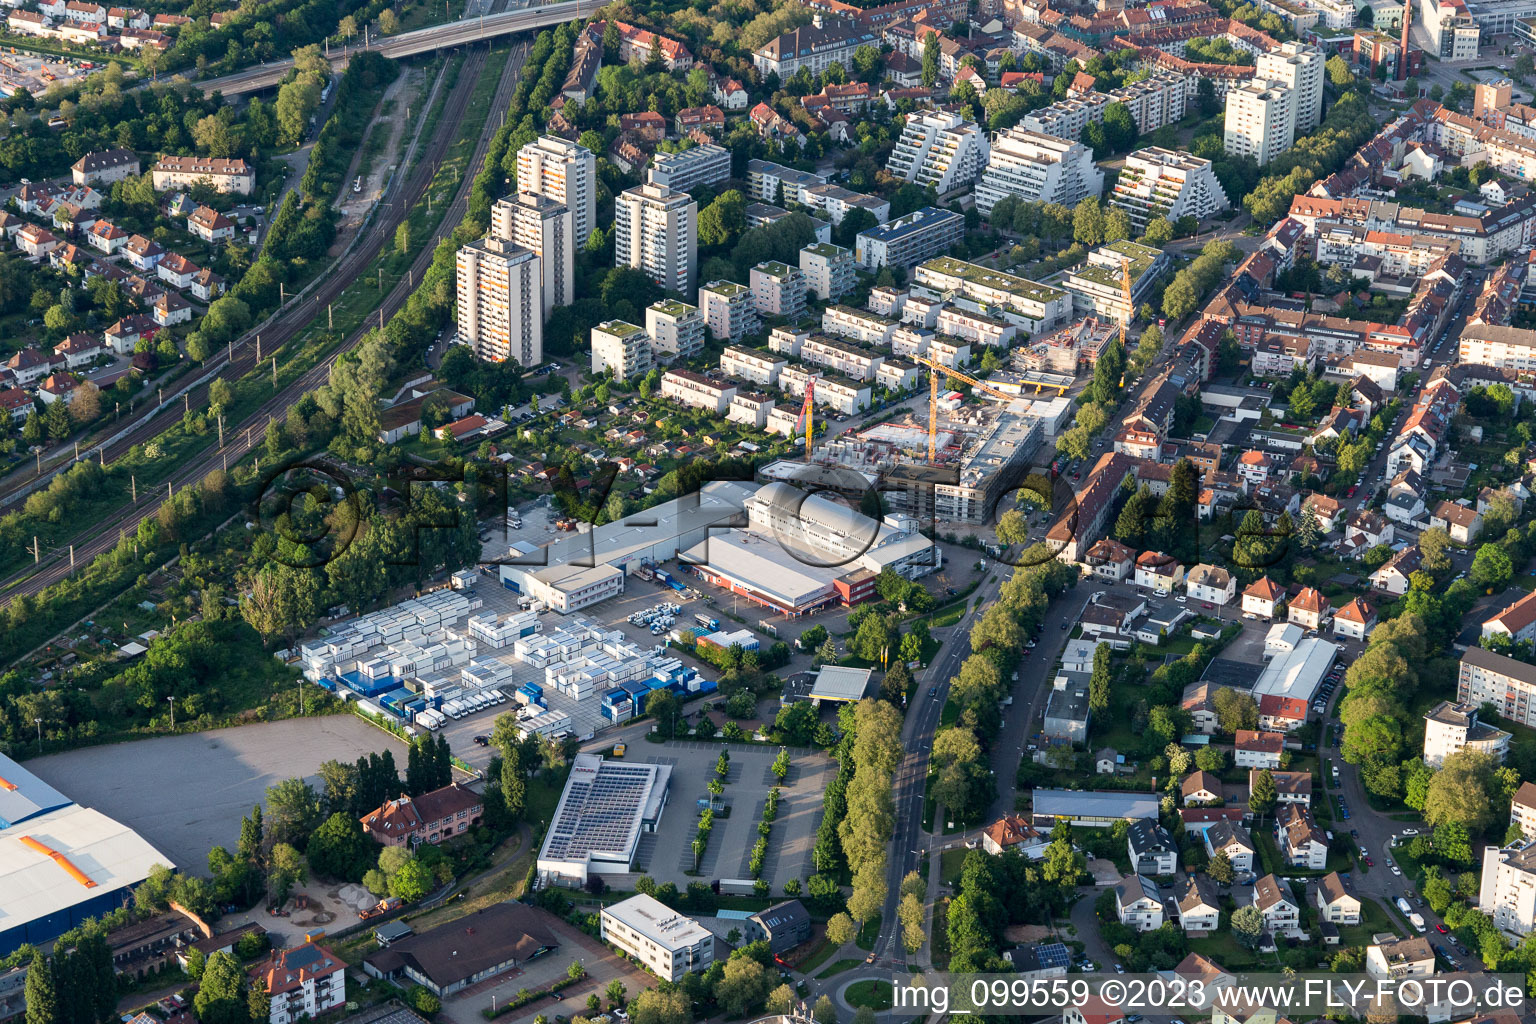 Aerial view of Killisfeldstr in the district Durlach in Karlsruhe in the state Baden-Wuerttemberg, Germany